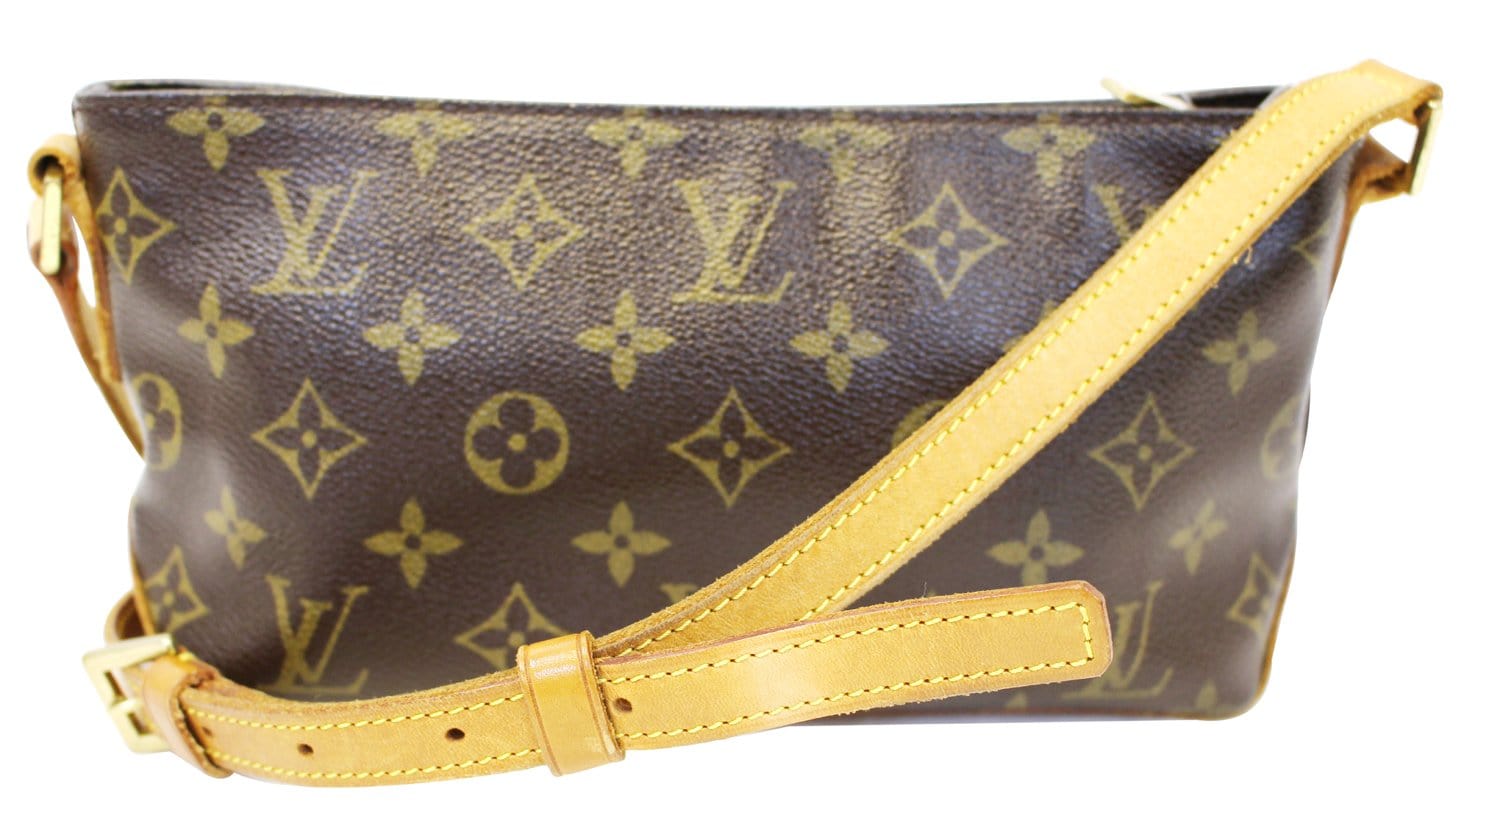 Best Louis Vuitton Crossbody bag for everyday use[Top 3 LV CB  Review-Drouot, Trocadero, Saumur-2019] 